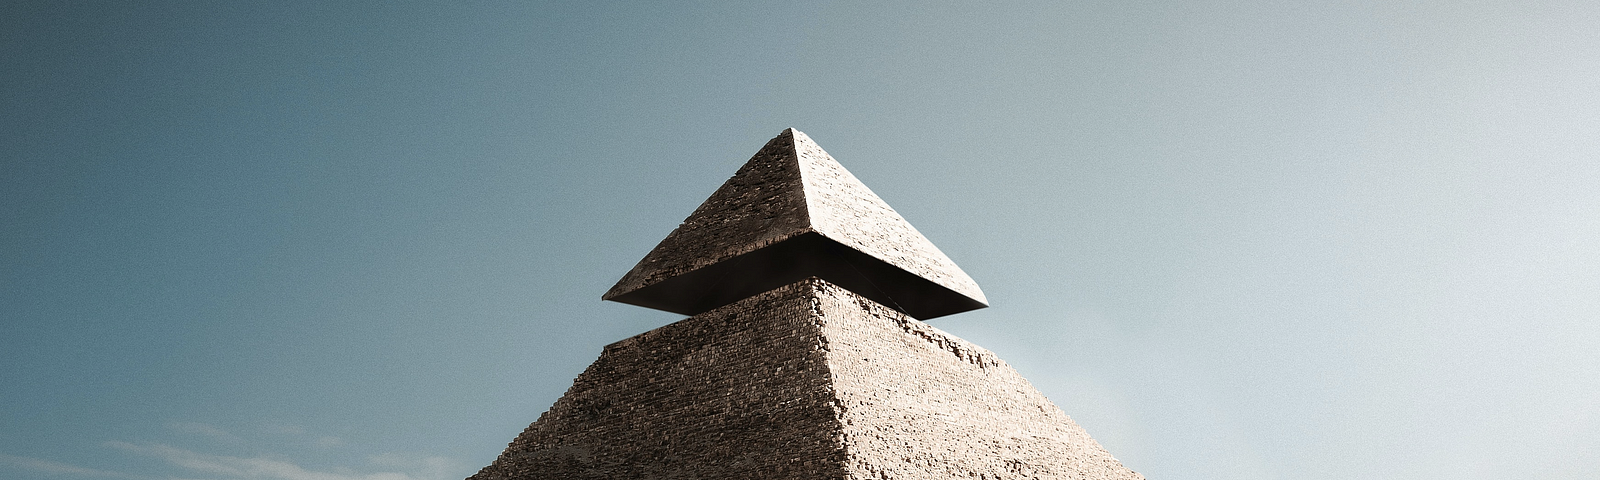 article image: pyramid with layers